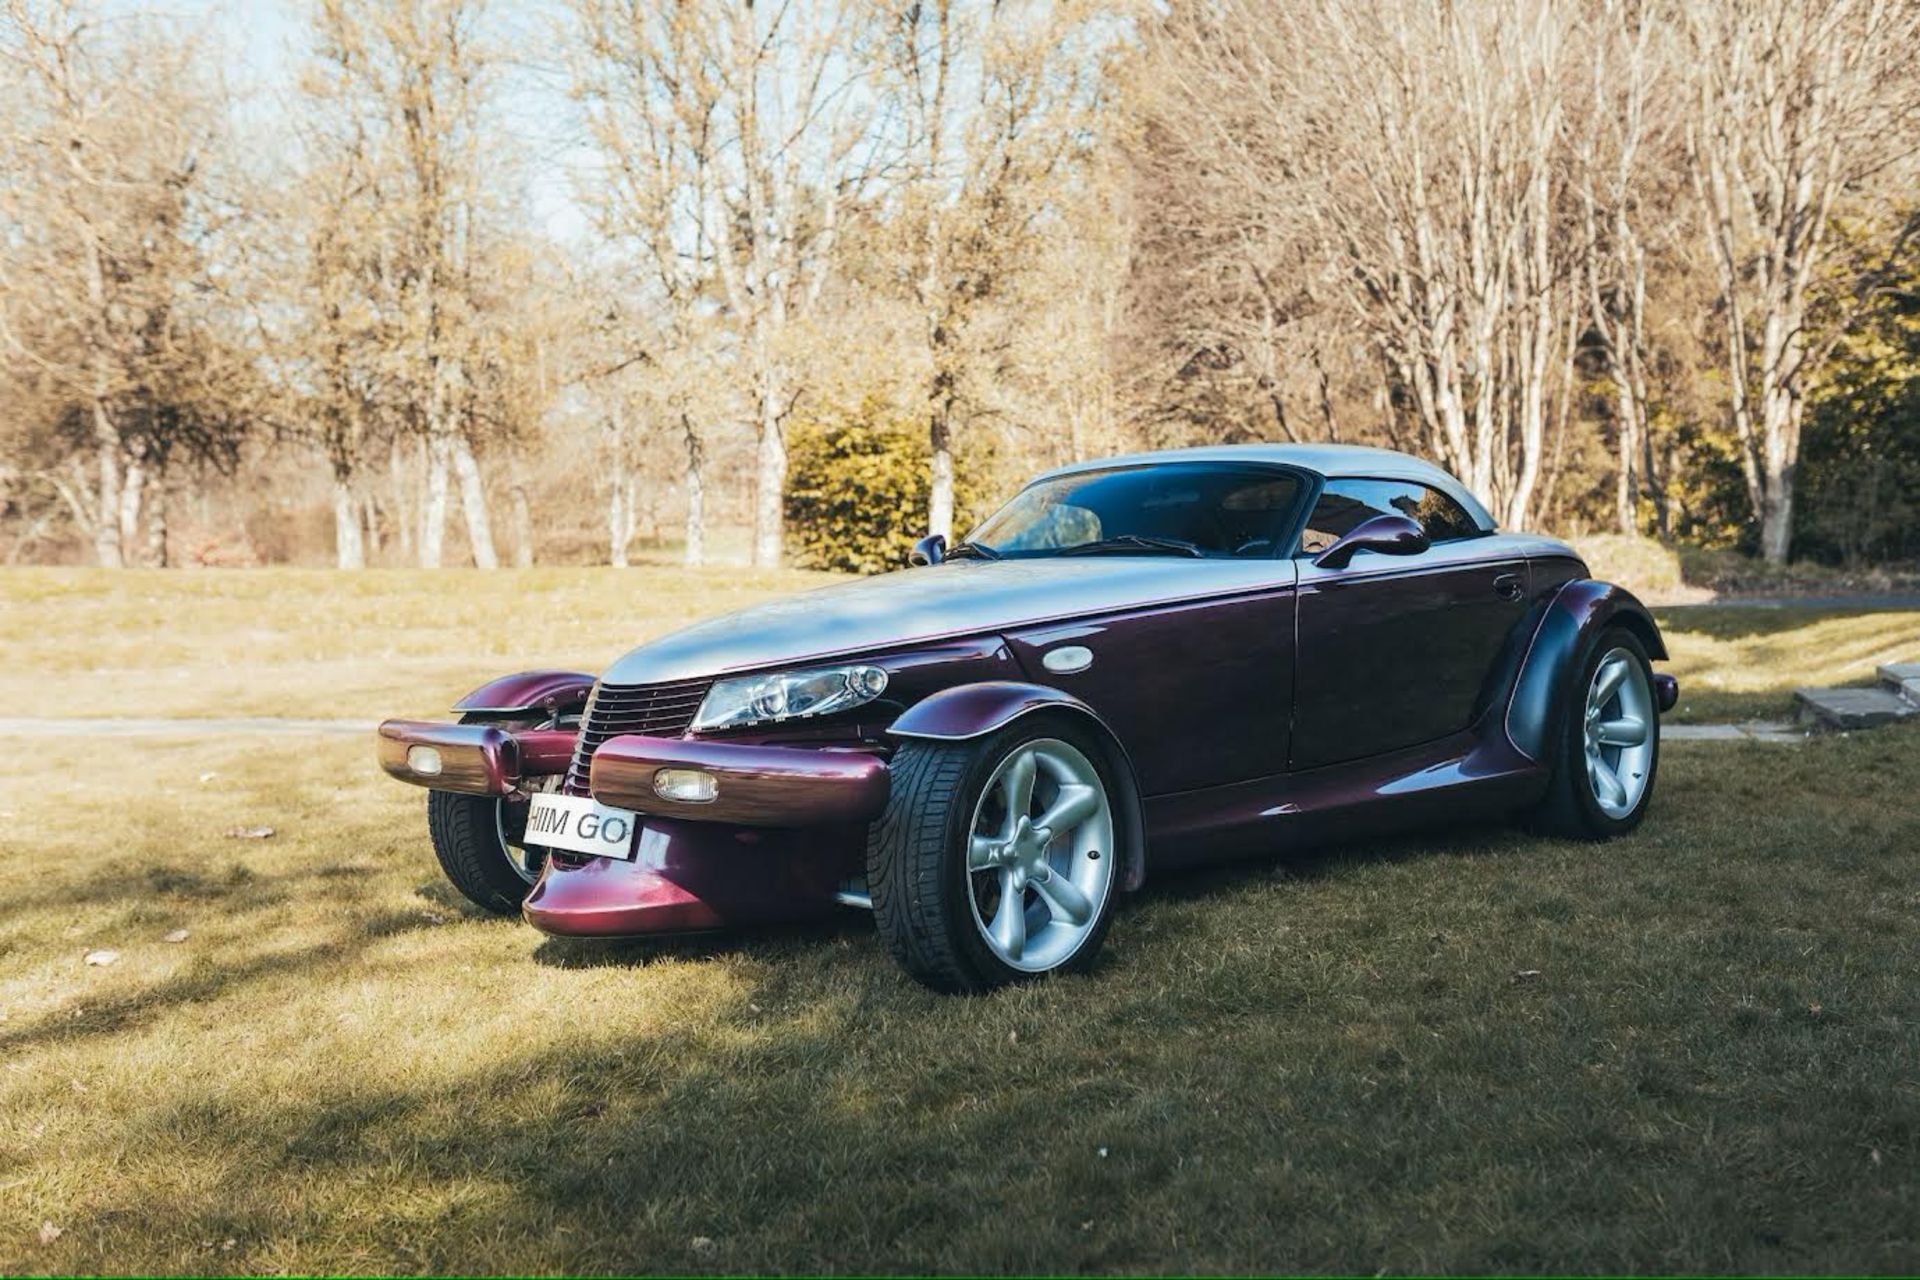 1998 CHRYSLER PLYMOUTH PROWLER V6 2 DOOR CONVERTIBLE, 3500cc PETROL ENGINE, AUTO *NO VAT* - Image 2 of 32